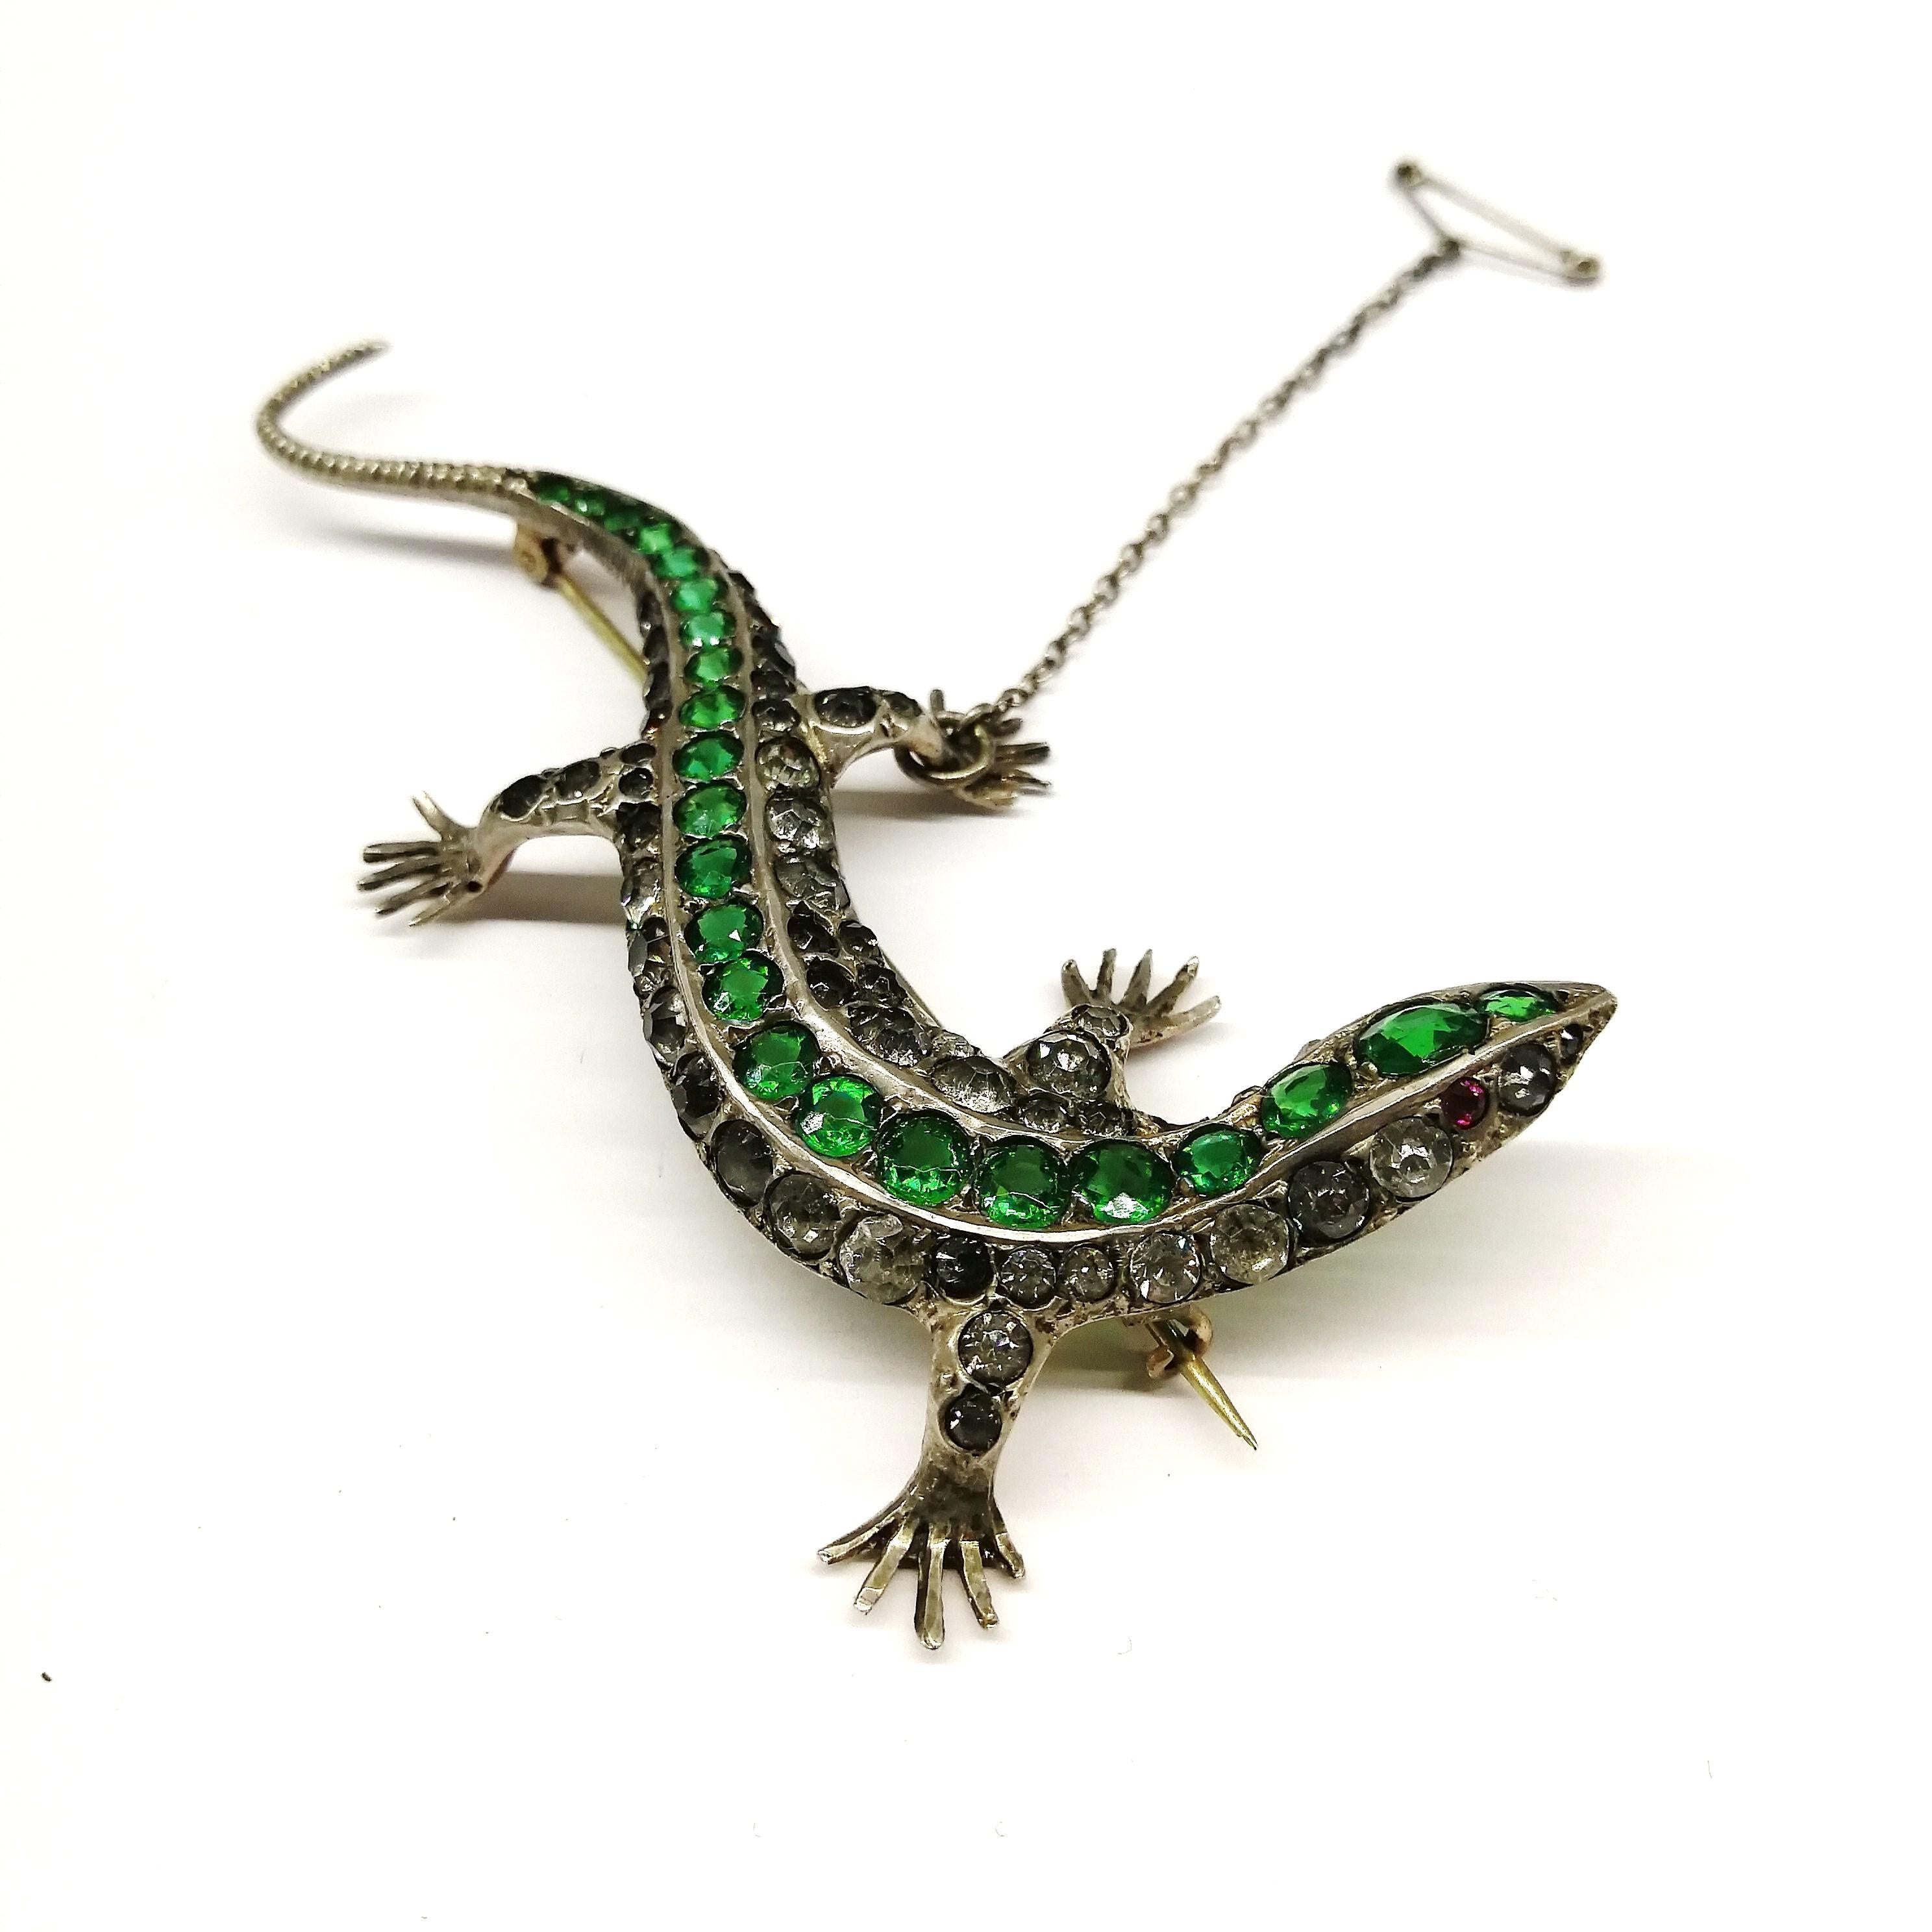 A large striking sterling silver 'lizard' brooch, in serpentine form, set with old cut emerald and clear pastes, and a ruby paste 'eye', from the early 1900s. it is most probably made in England. It is softly gilded on the reverse, whist the front